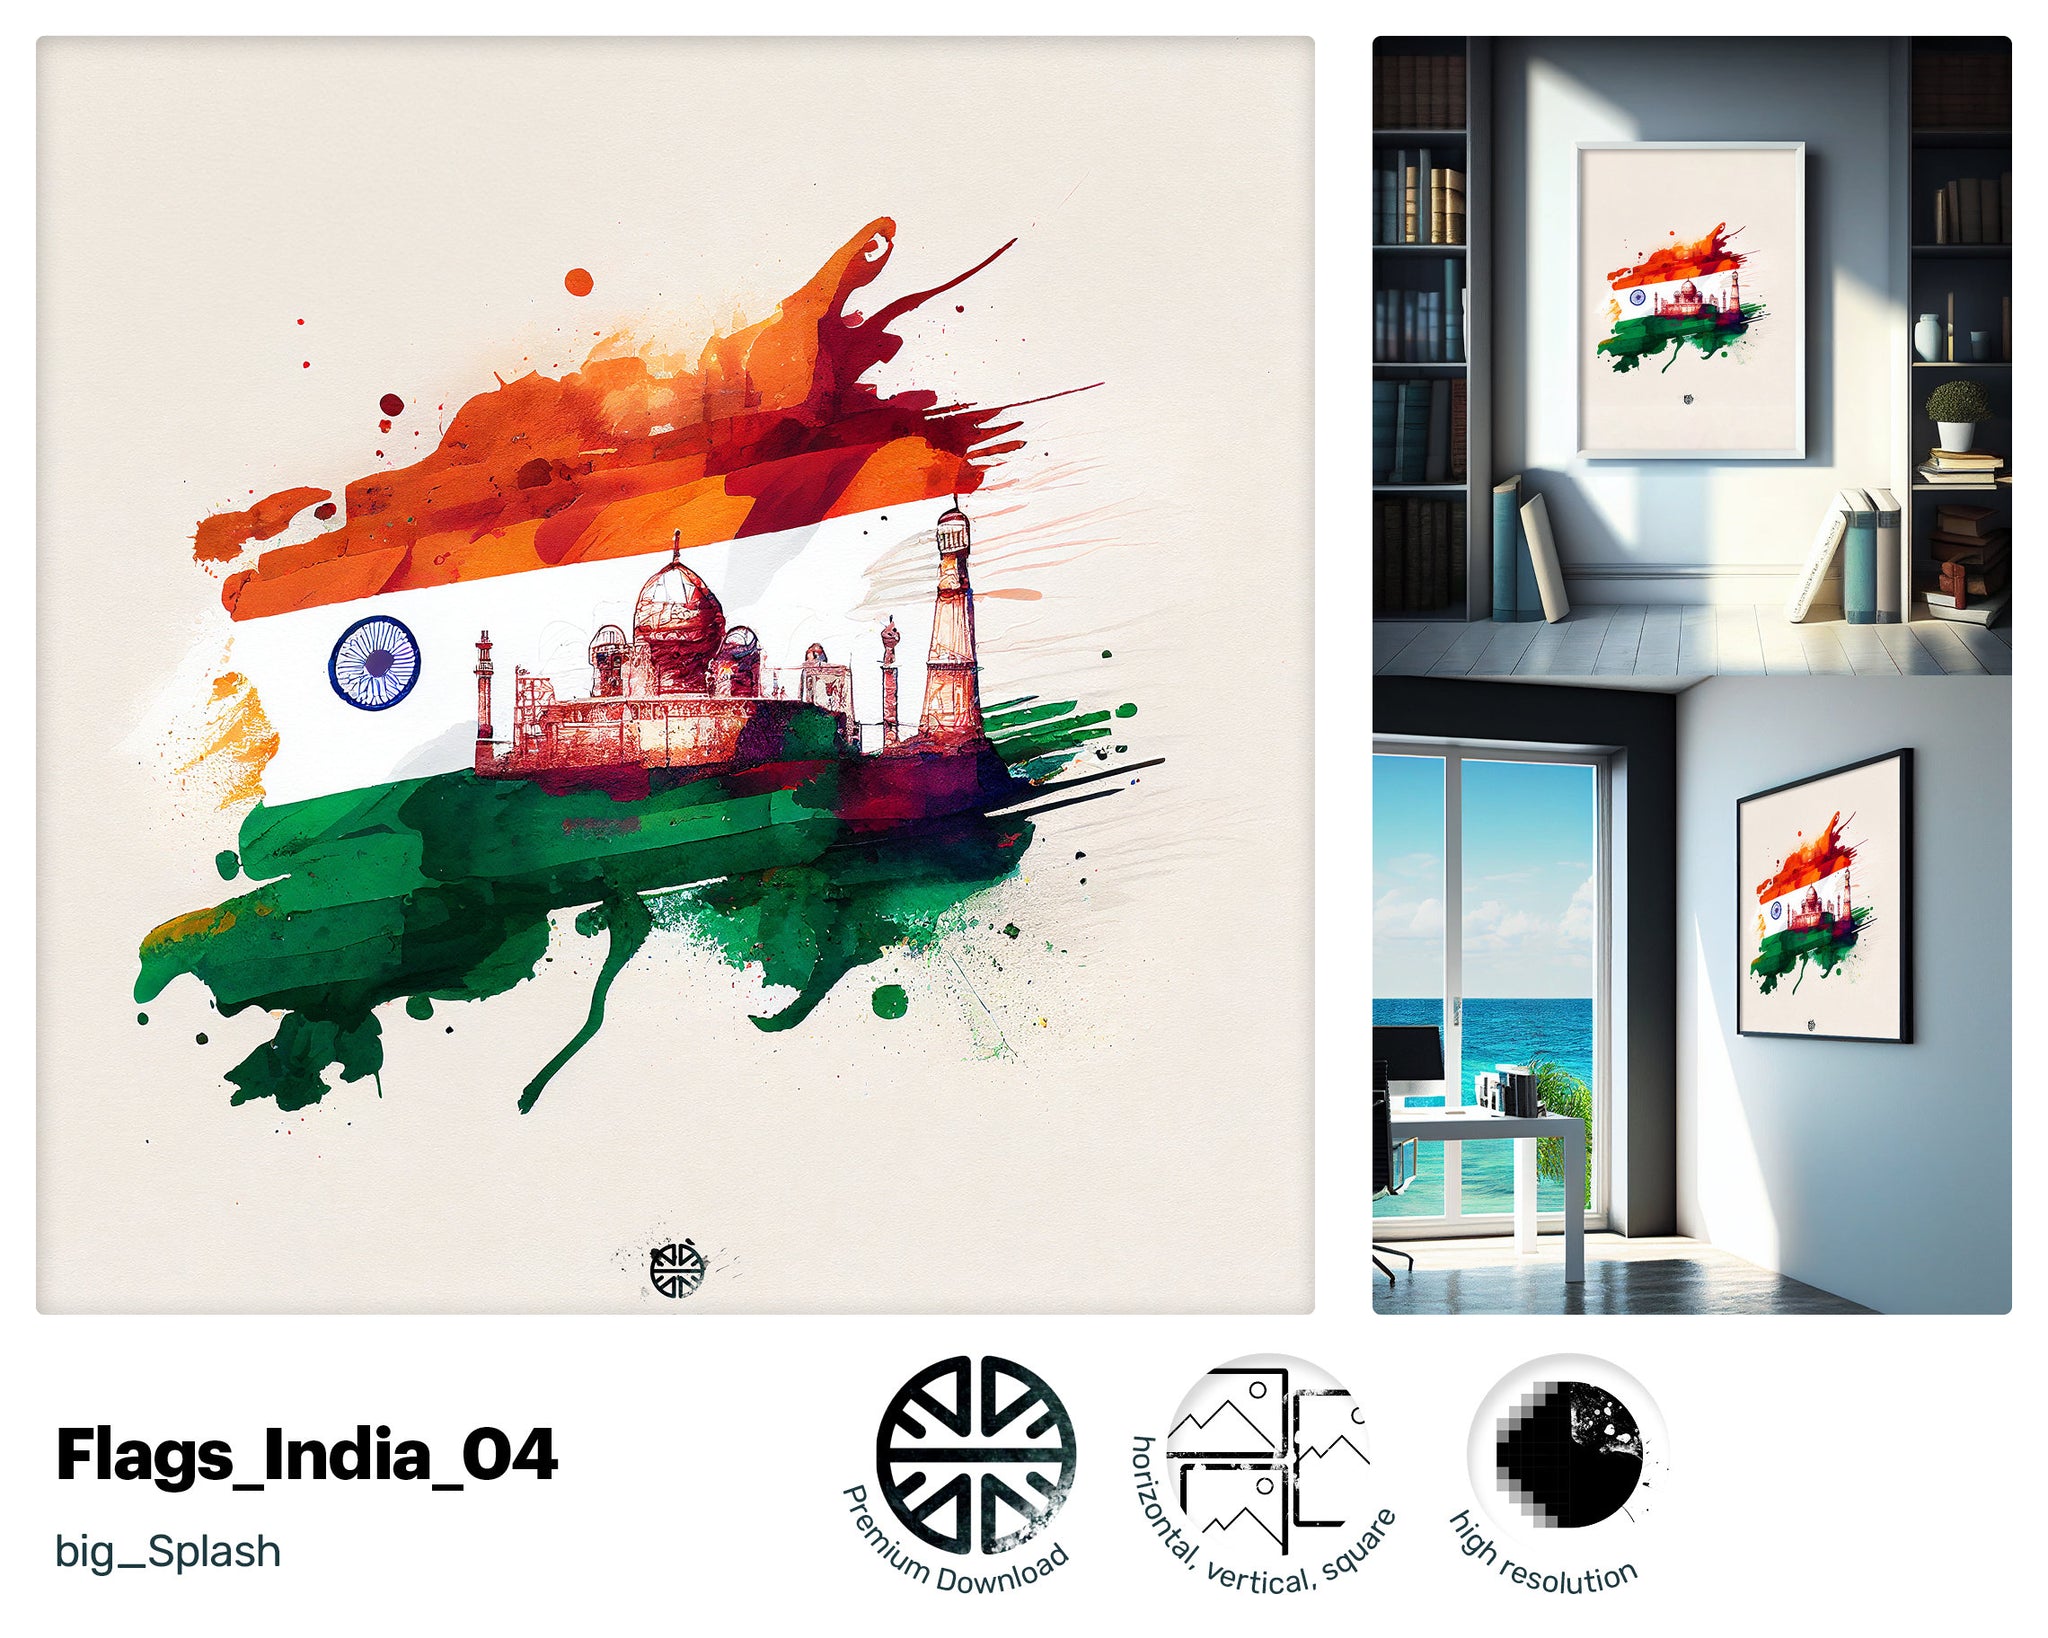 Fierce Zany Indian flag, Admired Charming JPG, Large Intriguing Glamorous Nifty Amusing Download